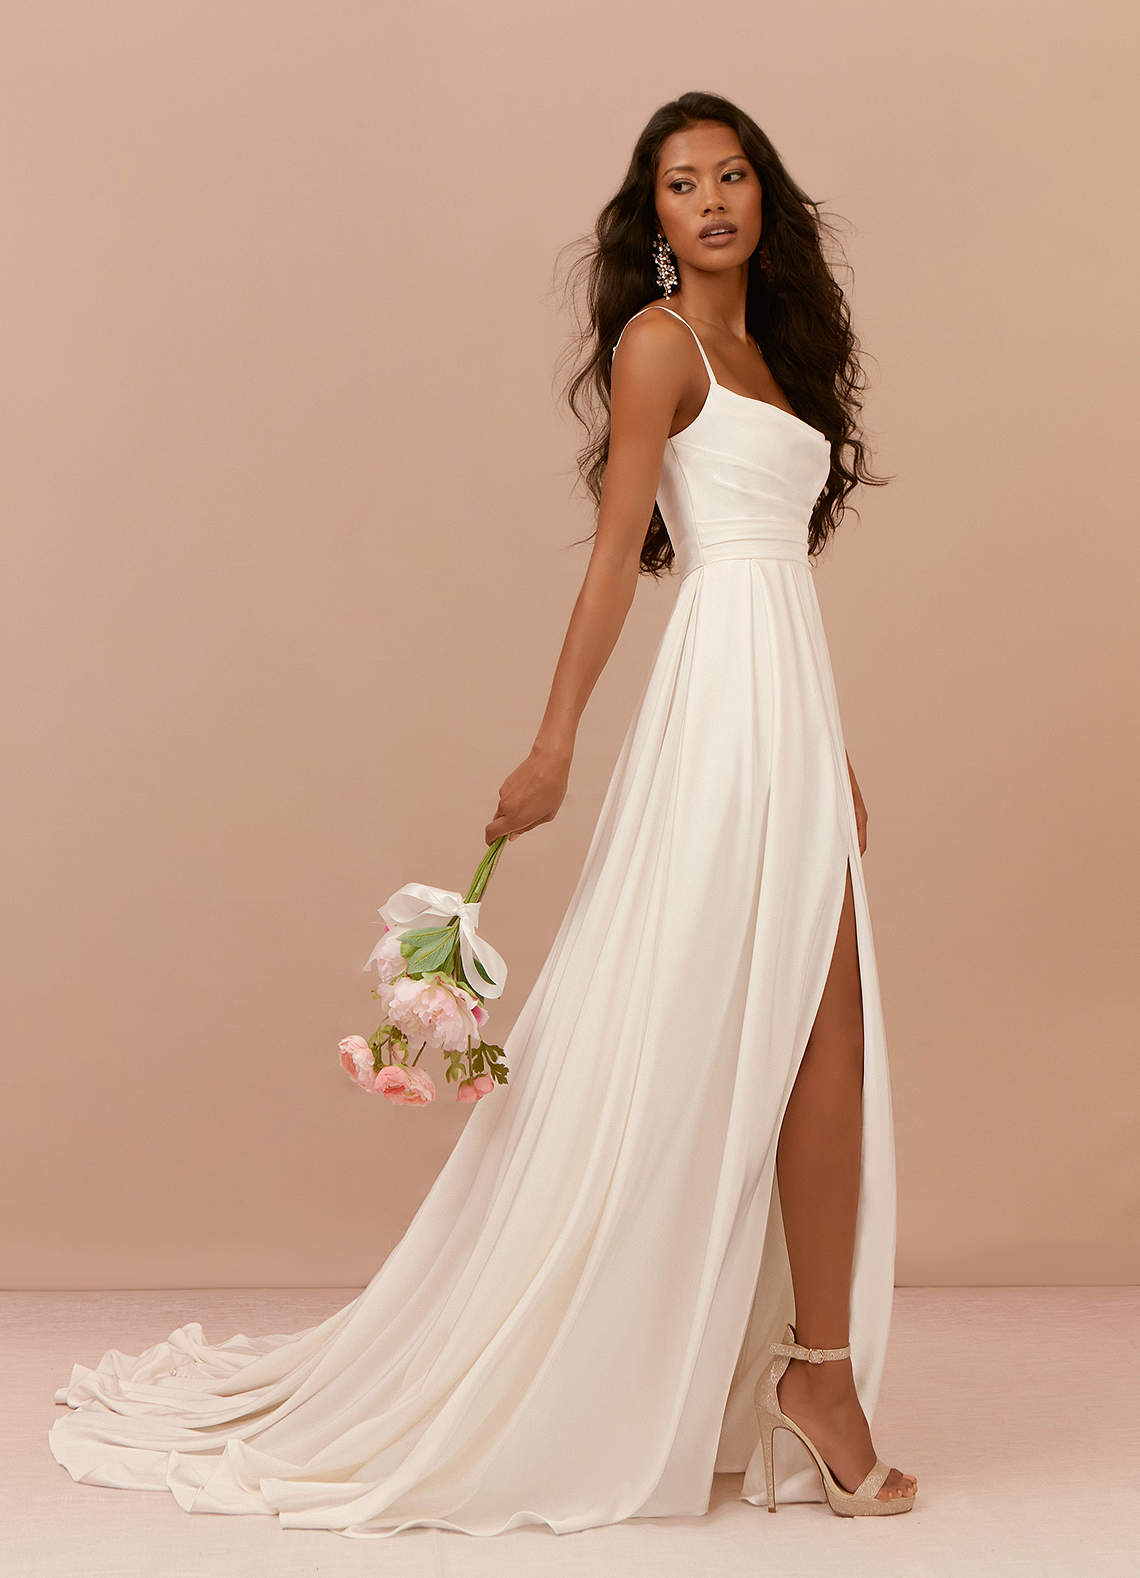 try at home wedding dresses